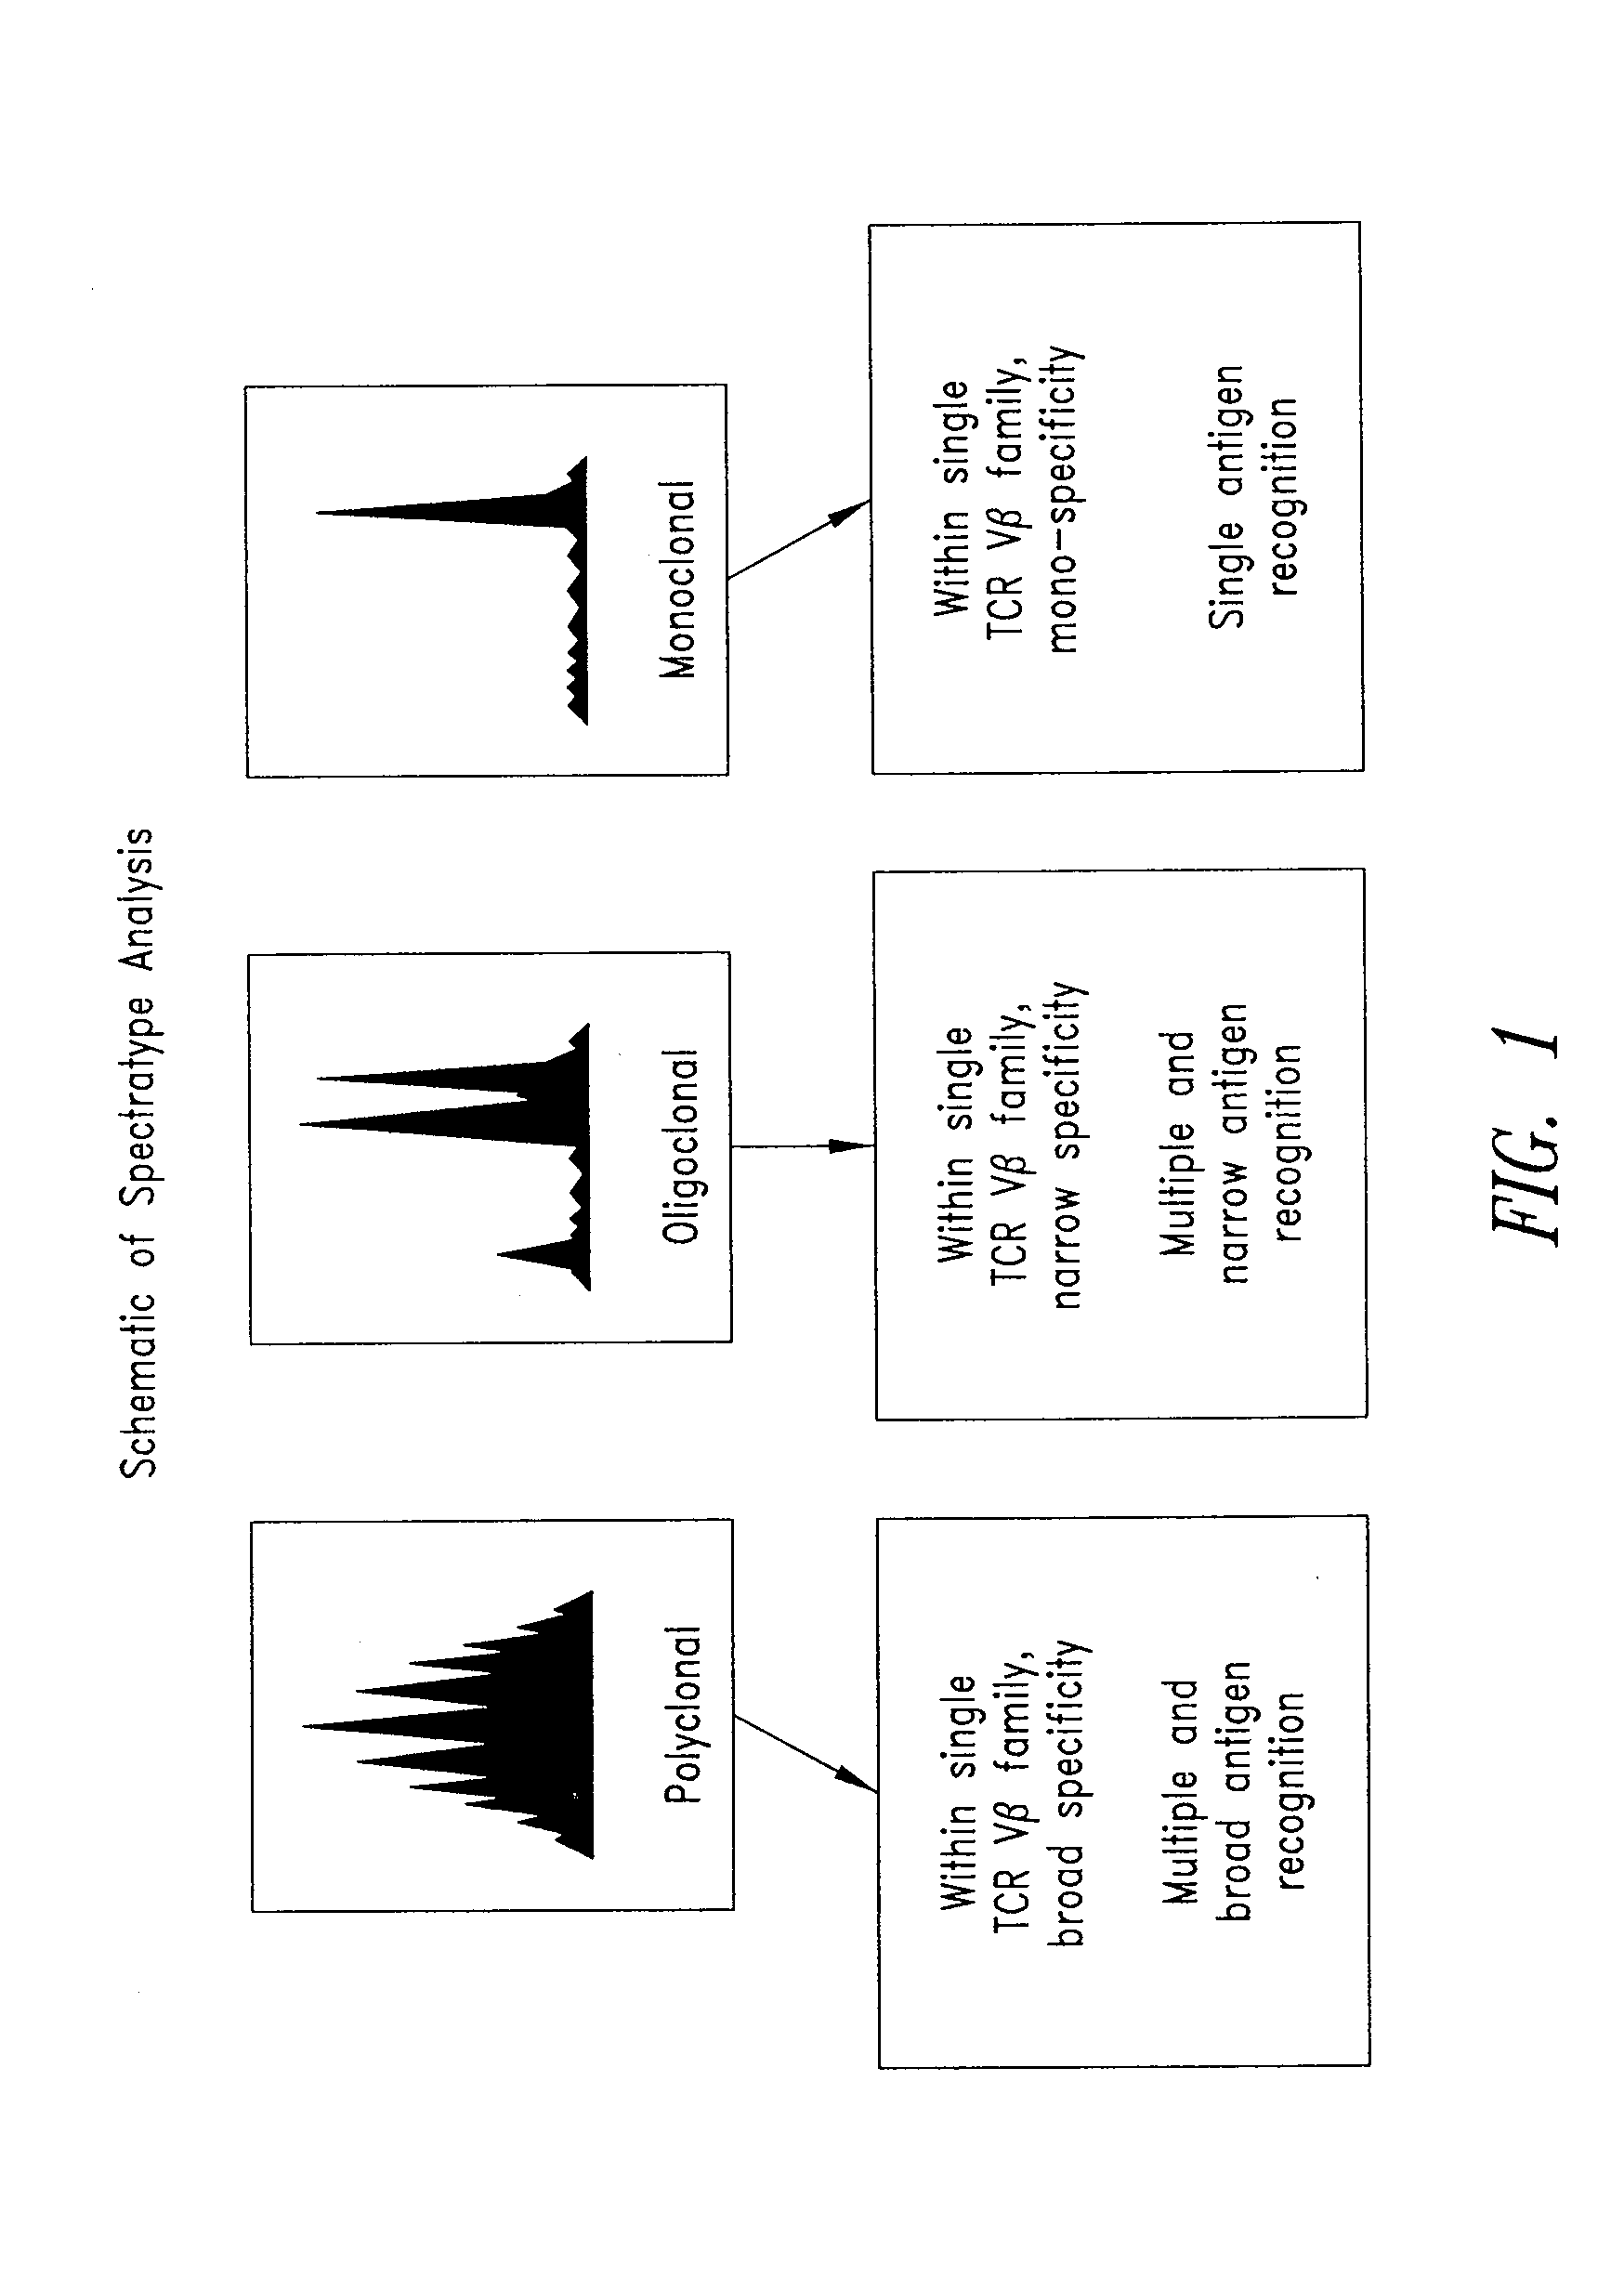 Compositions and methods for restoring immune responsiveness in patients with immunological defects